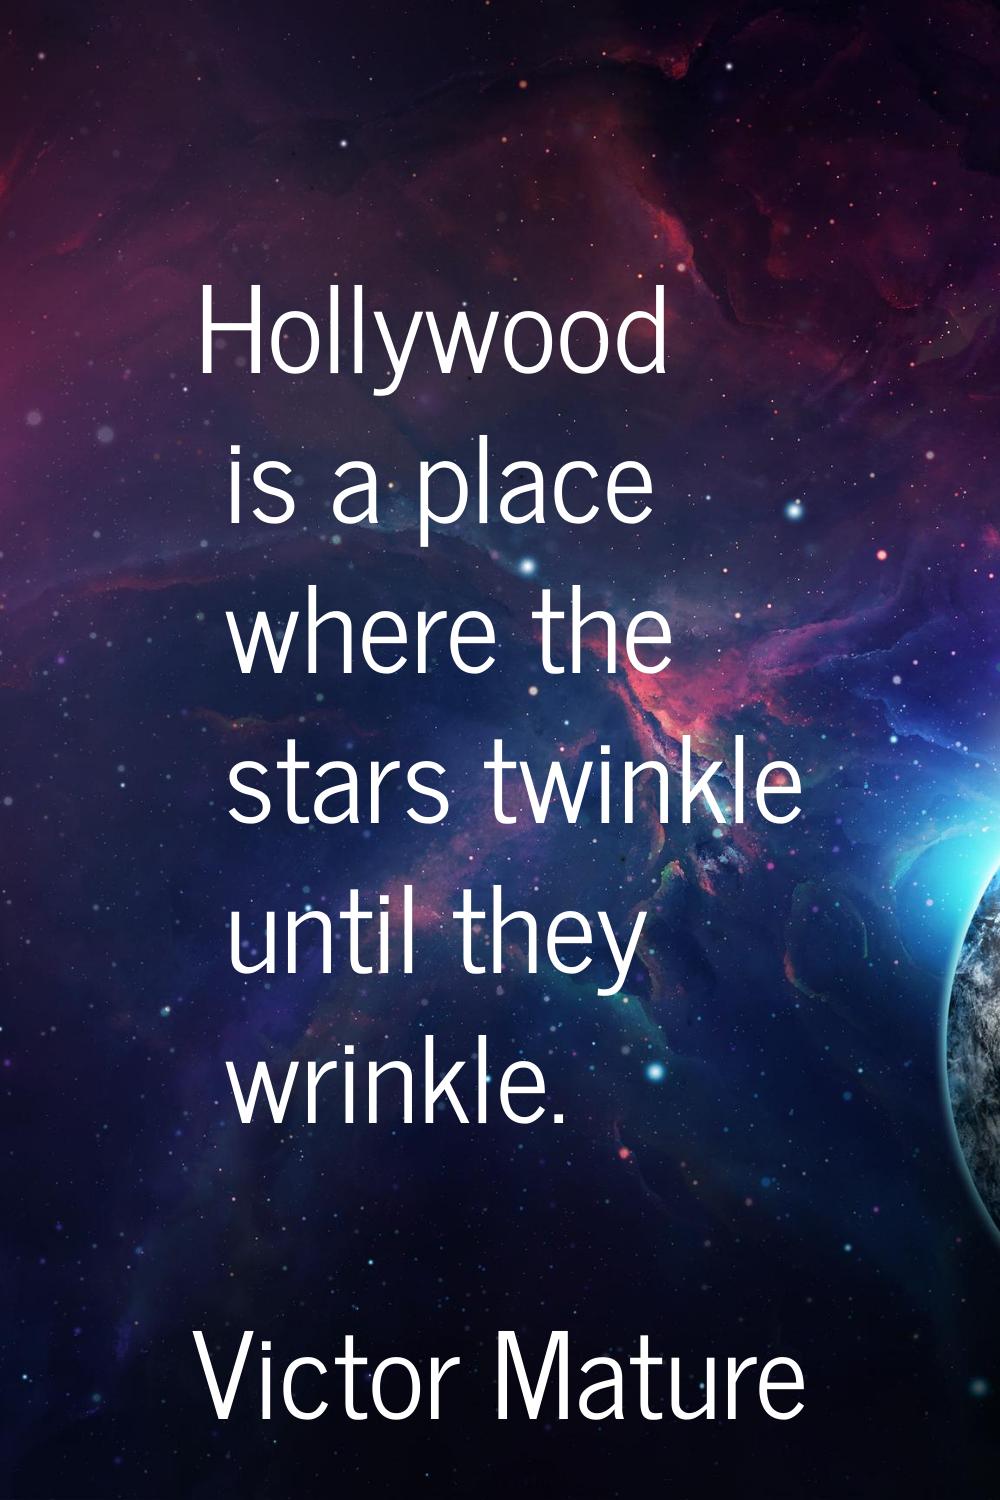 Hollywood is a place where the stars twinkle until they wrinkle.